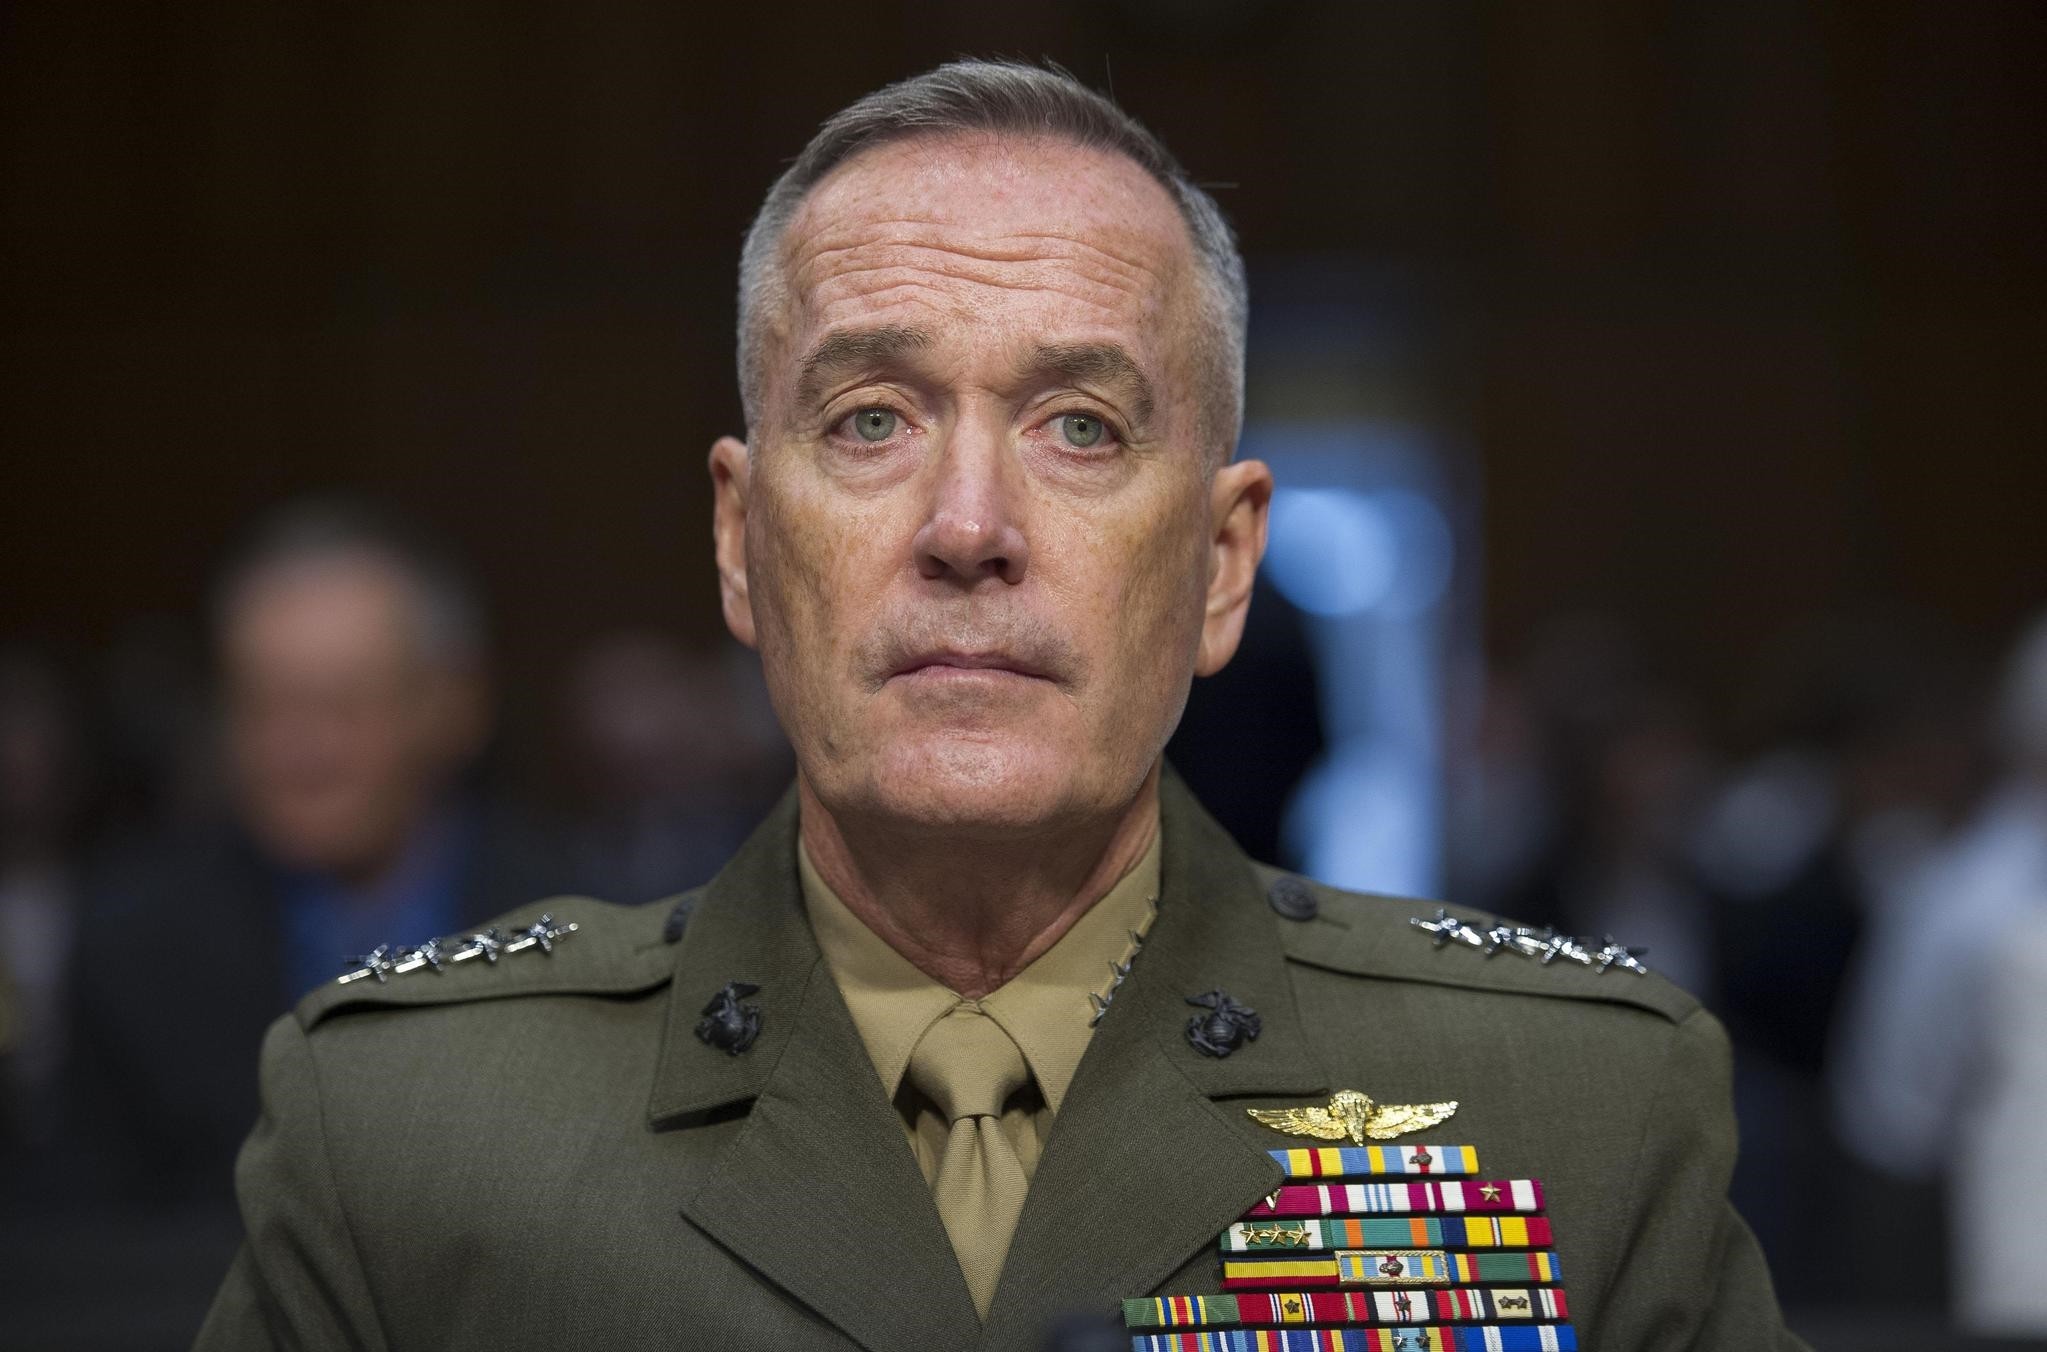 Gen. Joseph Dunford, Jr., testifies during his Senate Armed Services Committee confirmation hearing to become the Chairman of the Joint Chiefs of Staff, on Capitol Hill in Washington. (AP Photo)